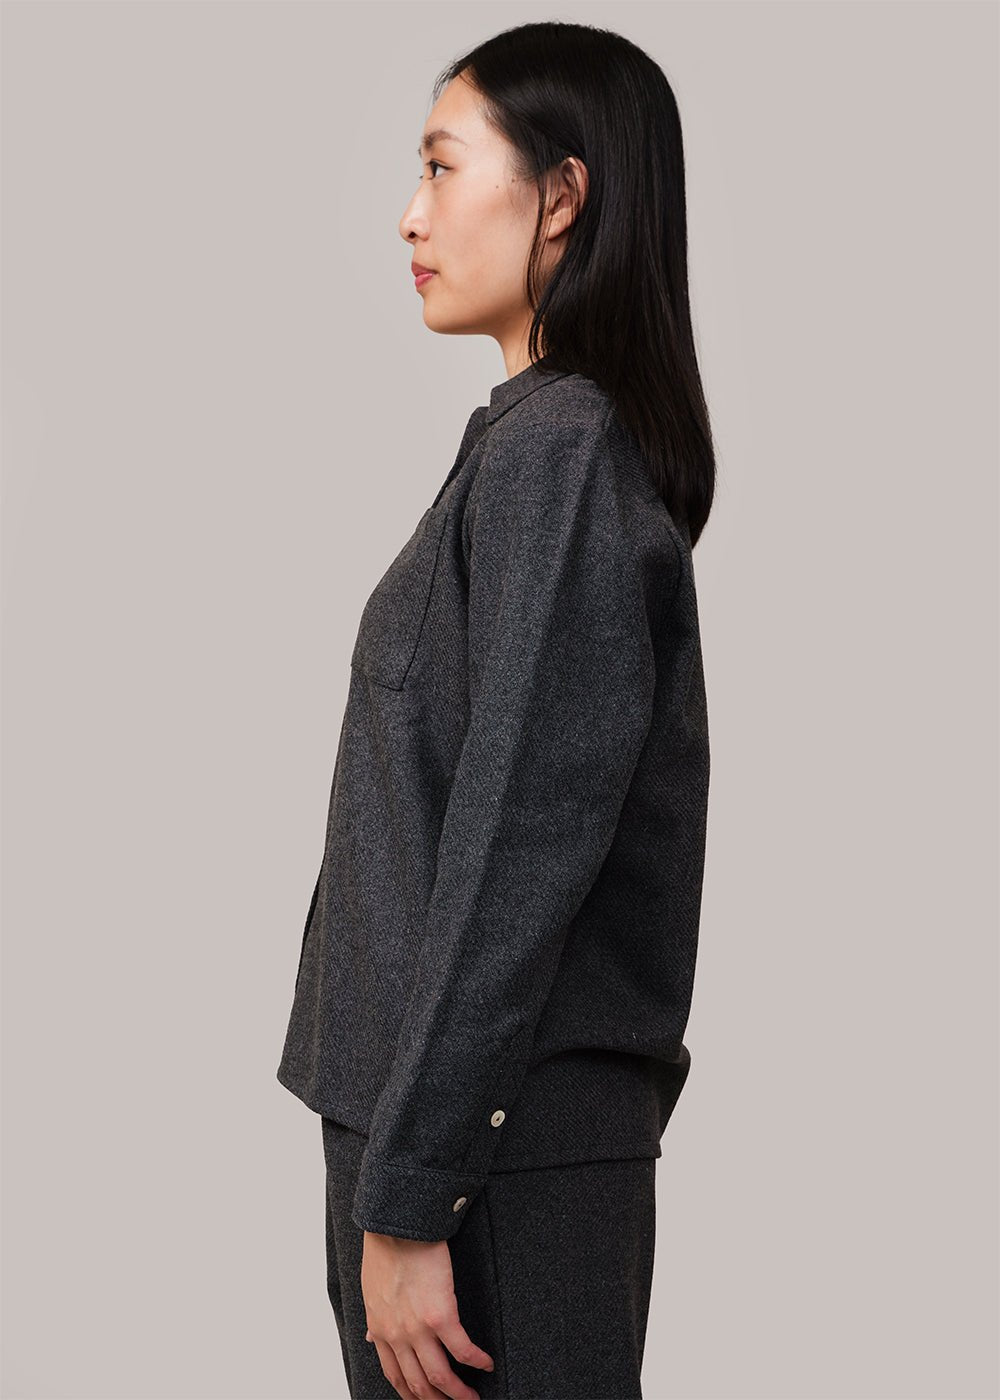 By Signe Grey Liv Flannel Shirt - New Classics Studios Sustainable Ethical Fashion Canada